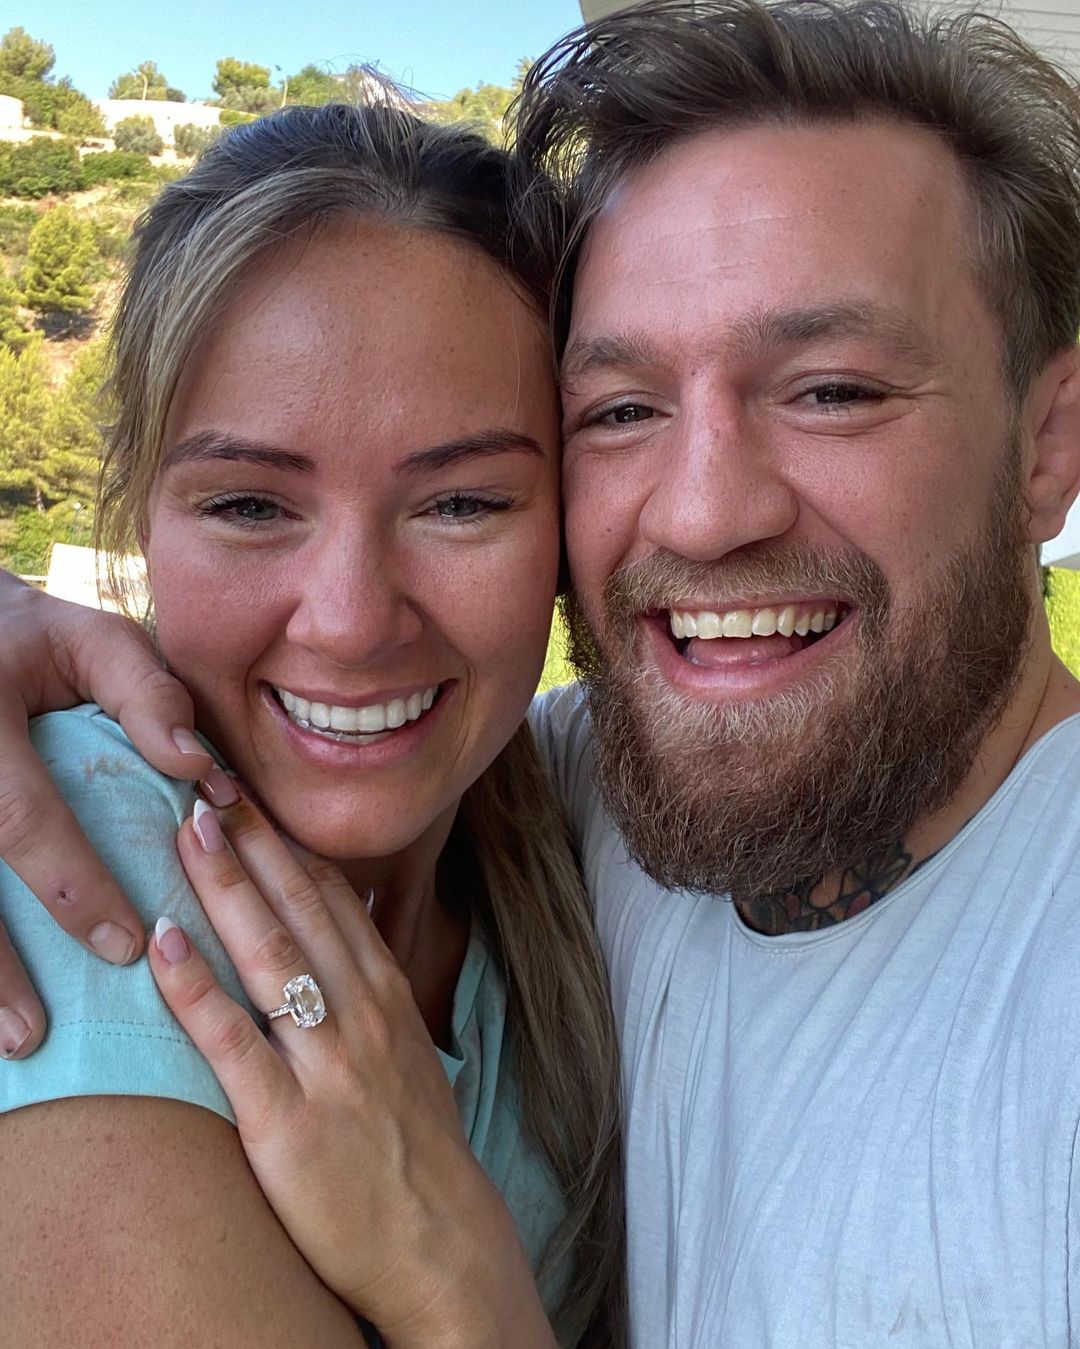 Conor McGregor and fiancée Dee Devlin baby boy ‘Family of 5